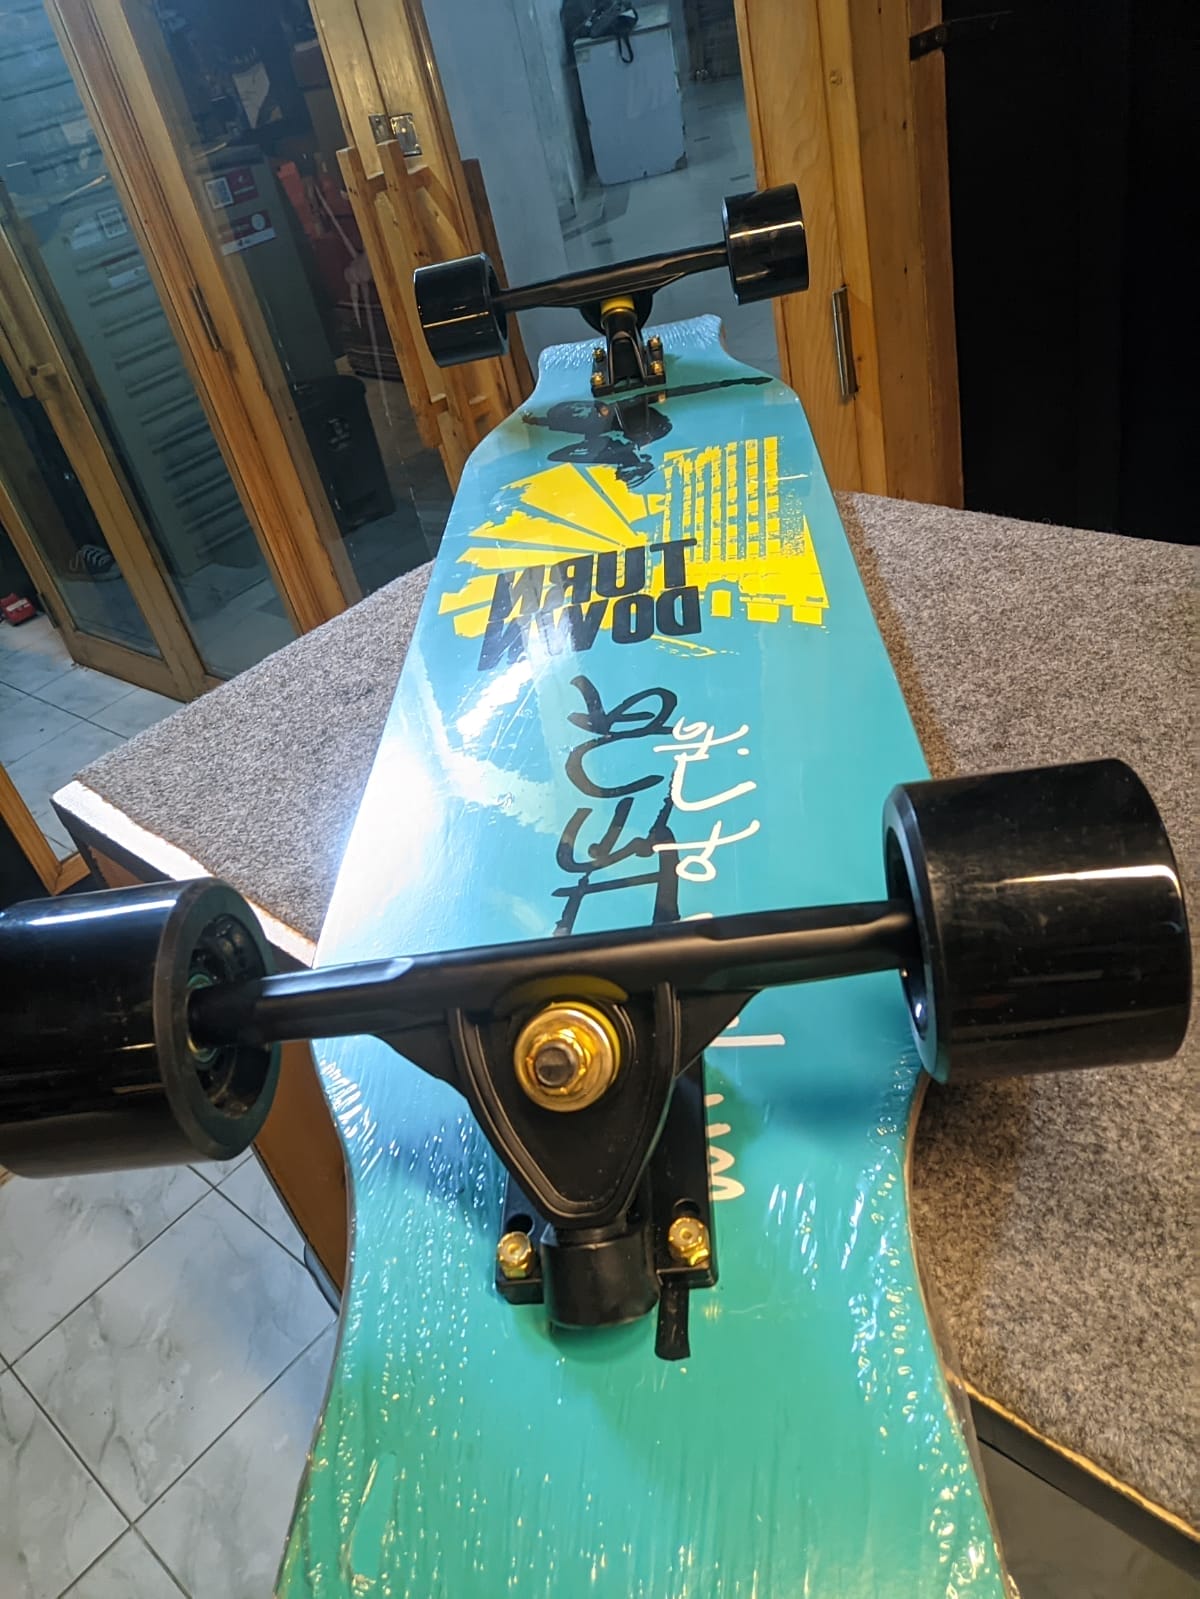 How do you maintain a longboard for dancing?